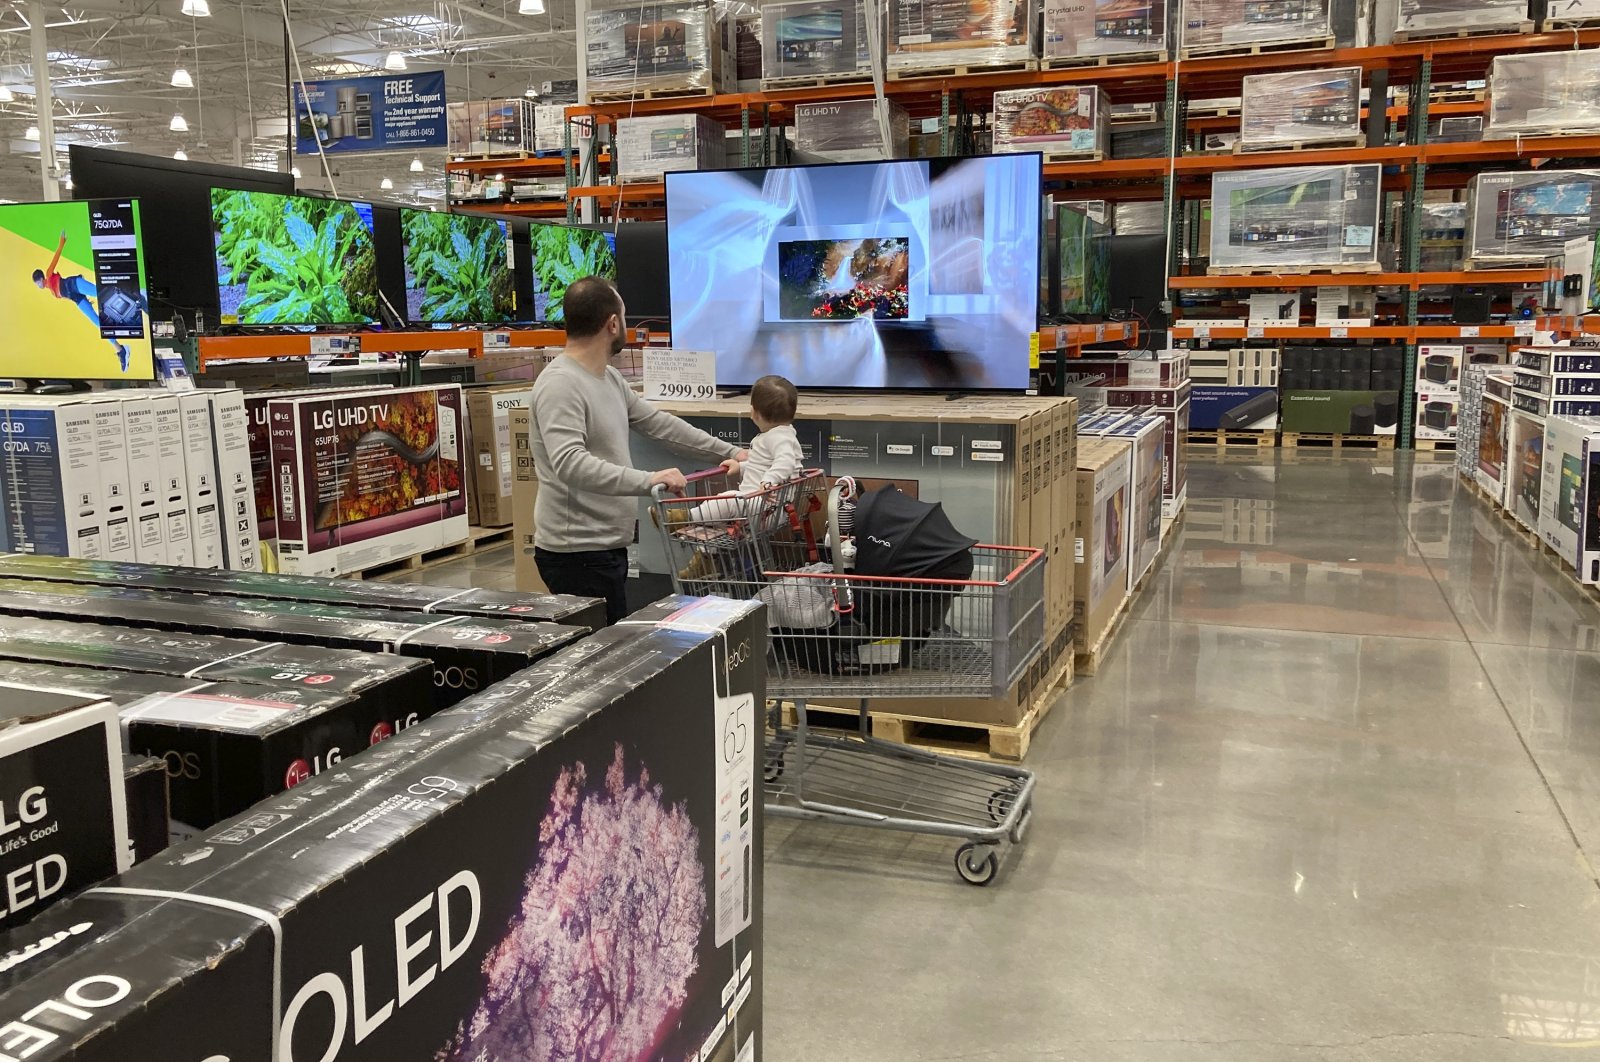 A shopper pushes a child in a cart while browsing big-screen televisions on display in the electronics section of a Costco warehouse in Lone Tree, Colo. U.S., March 29, 2022 (AP Photo)